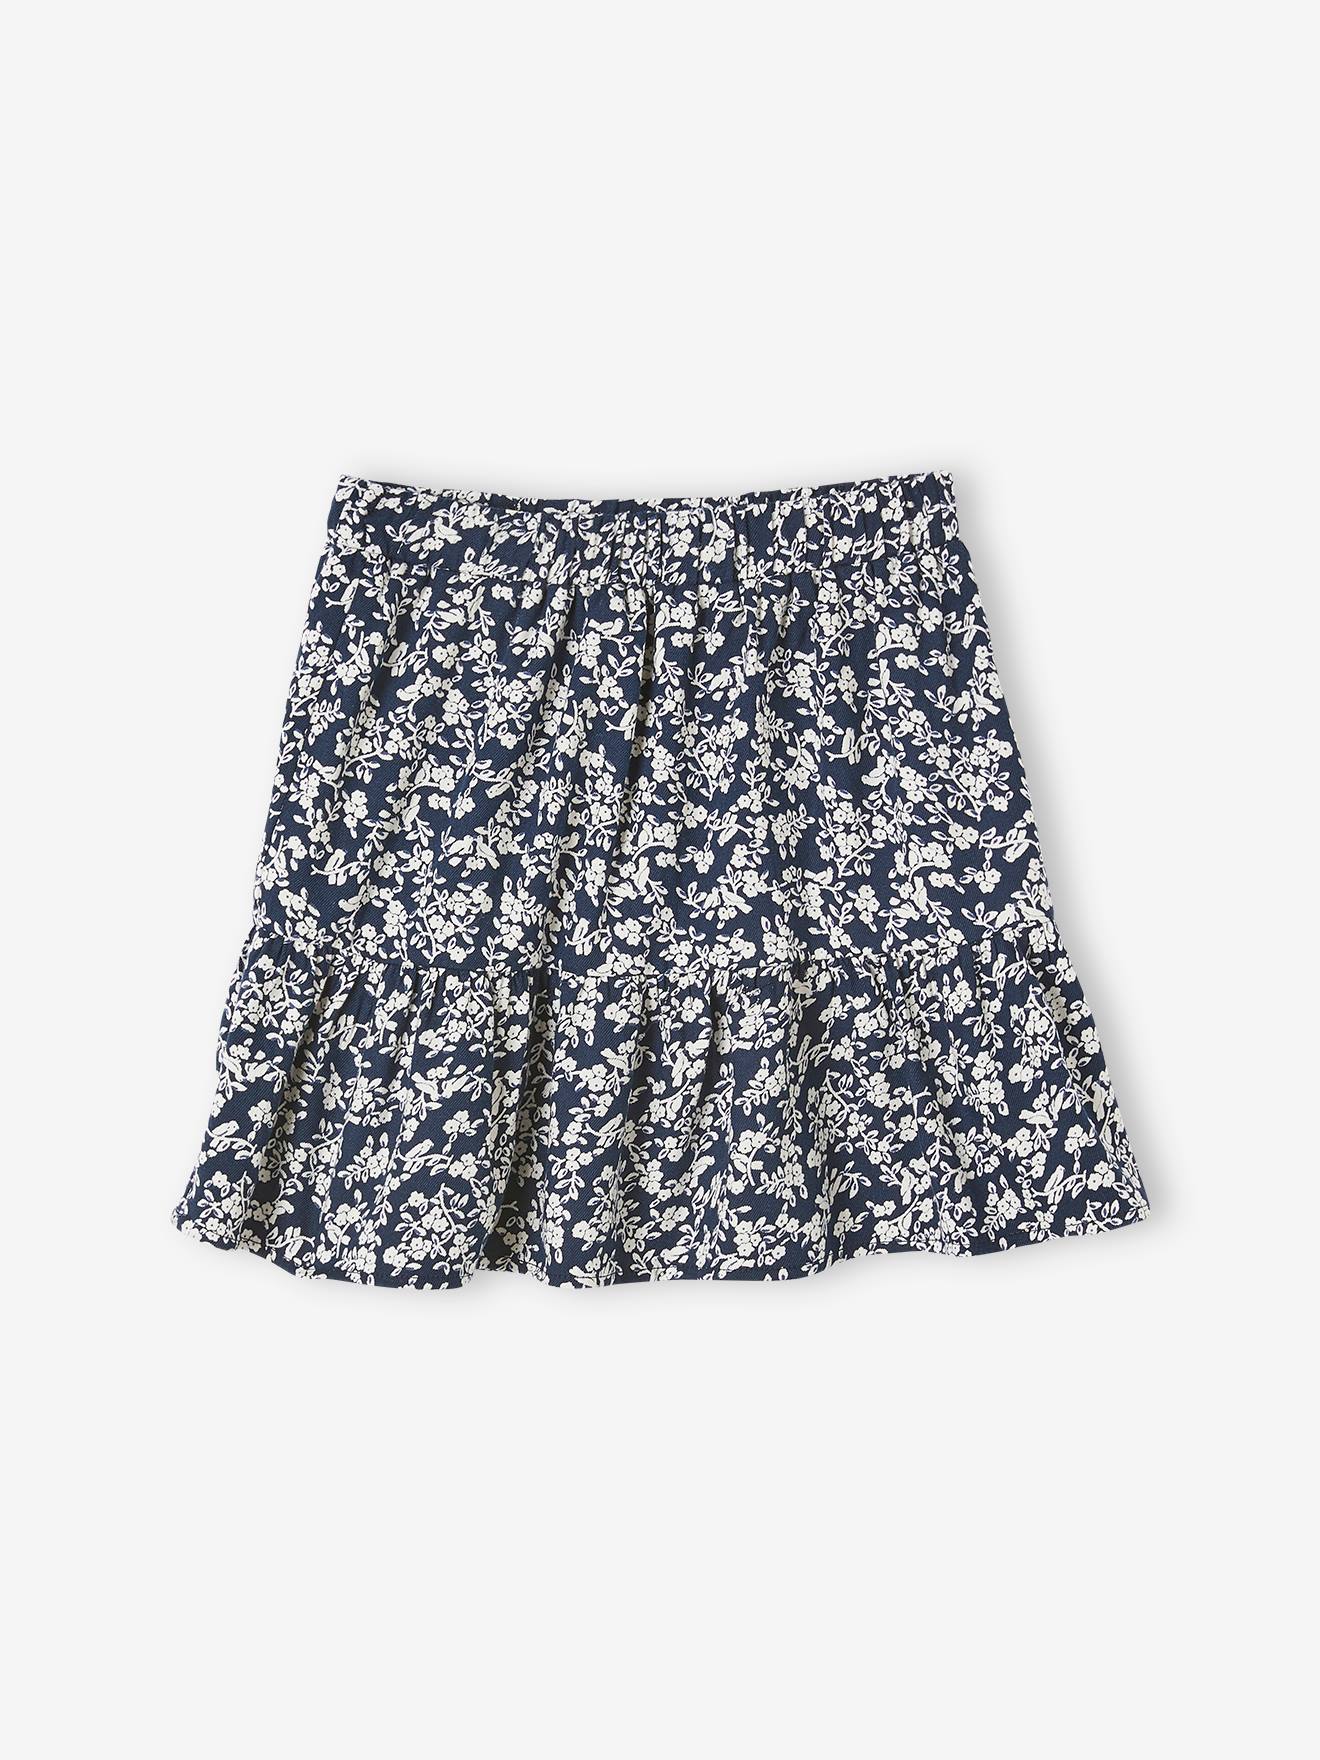 Skirt with Printed Ruffle for Girls blue dark all over printed